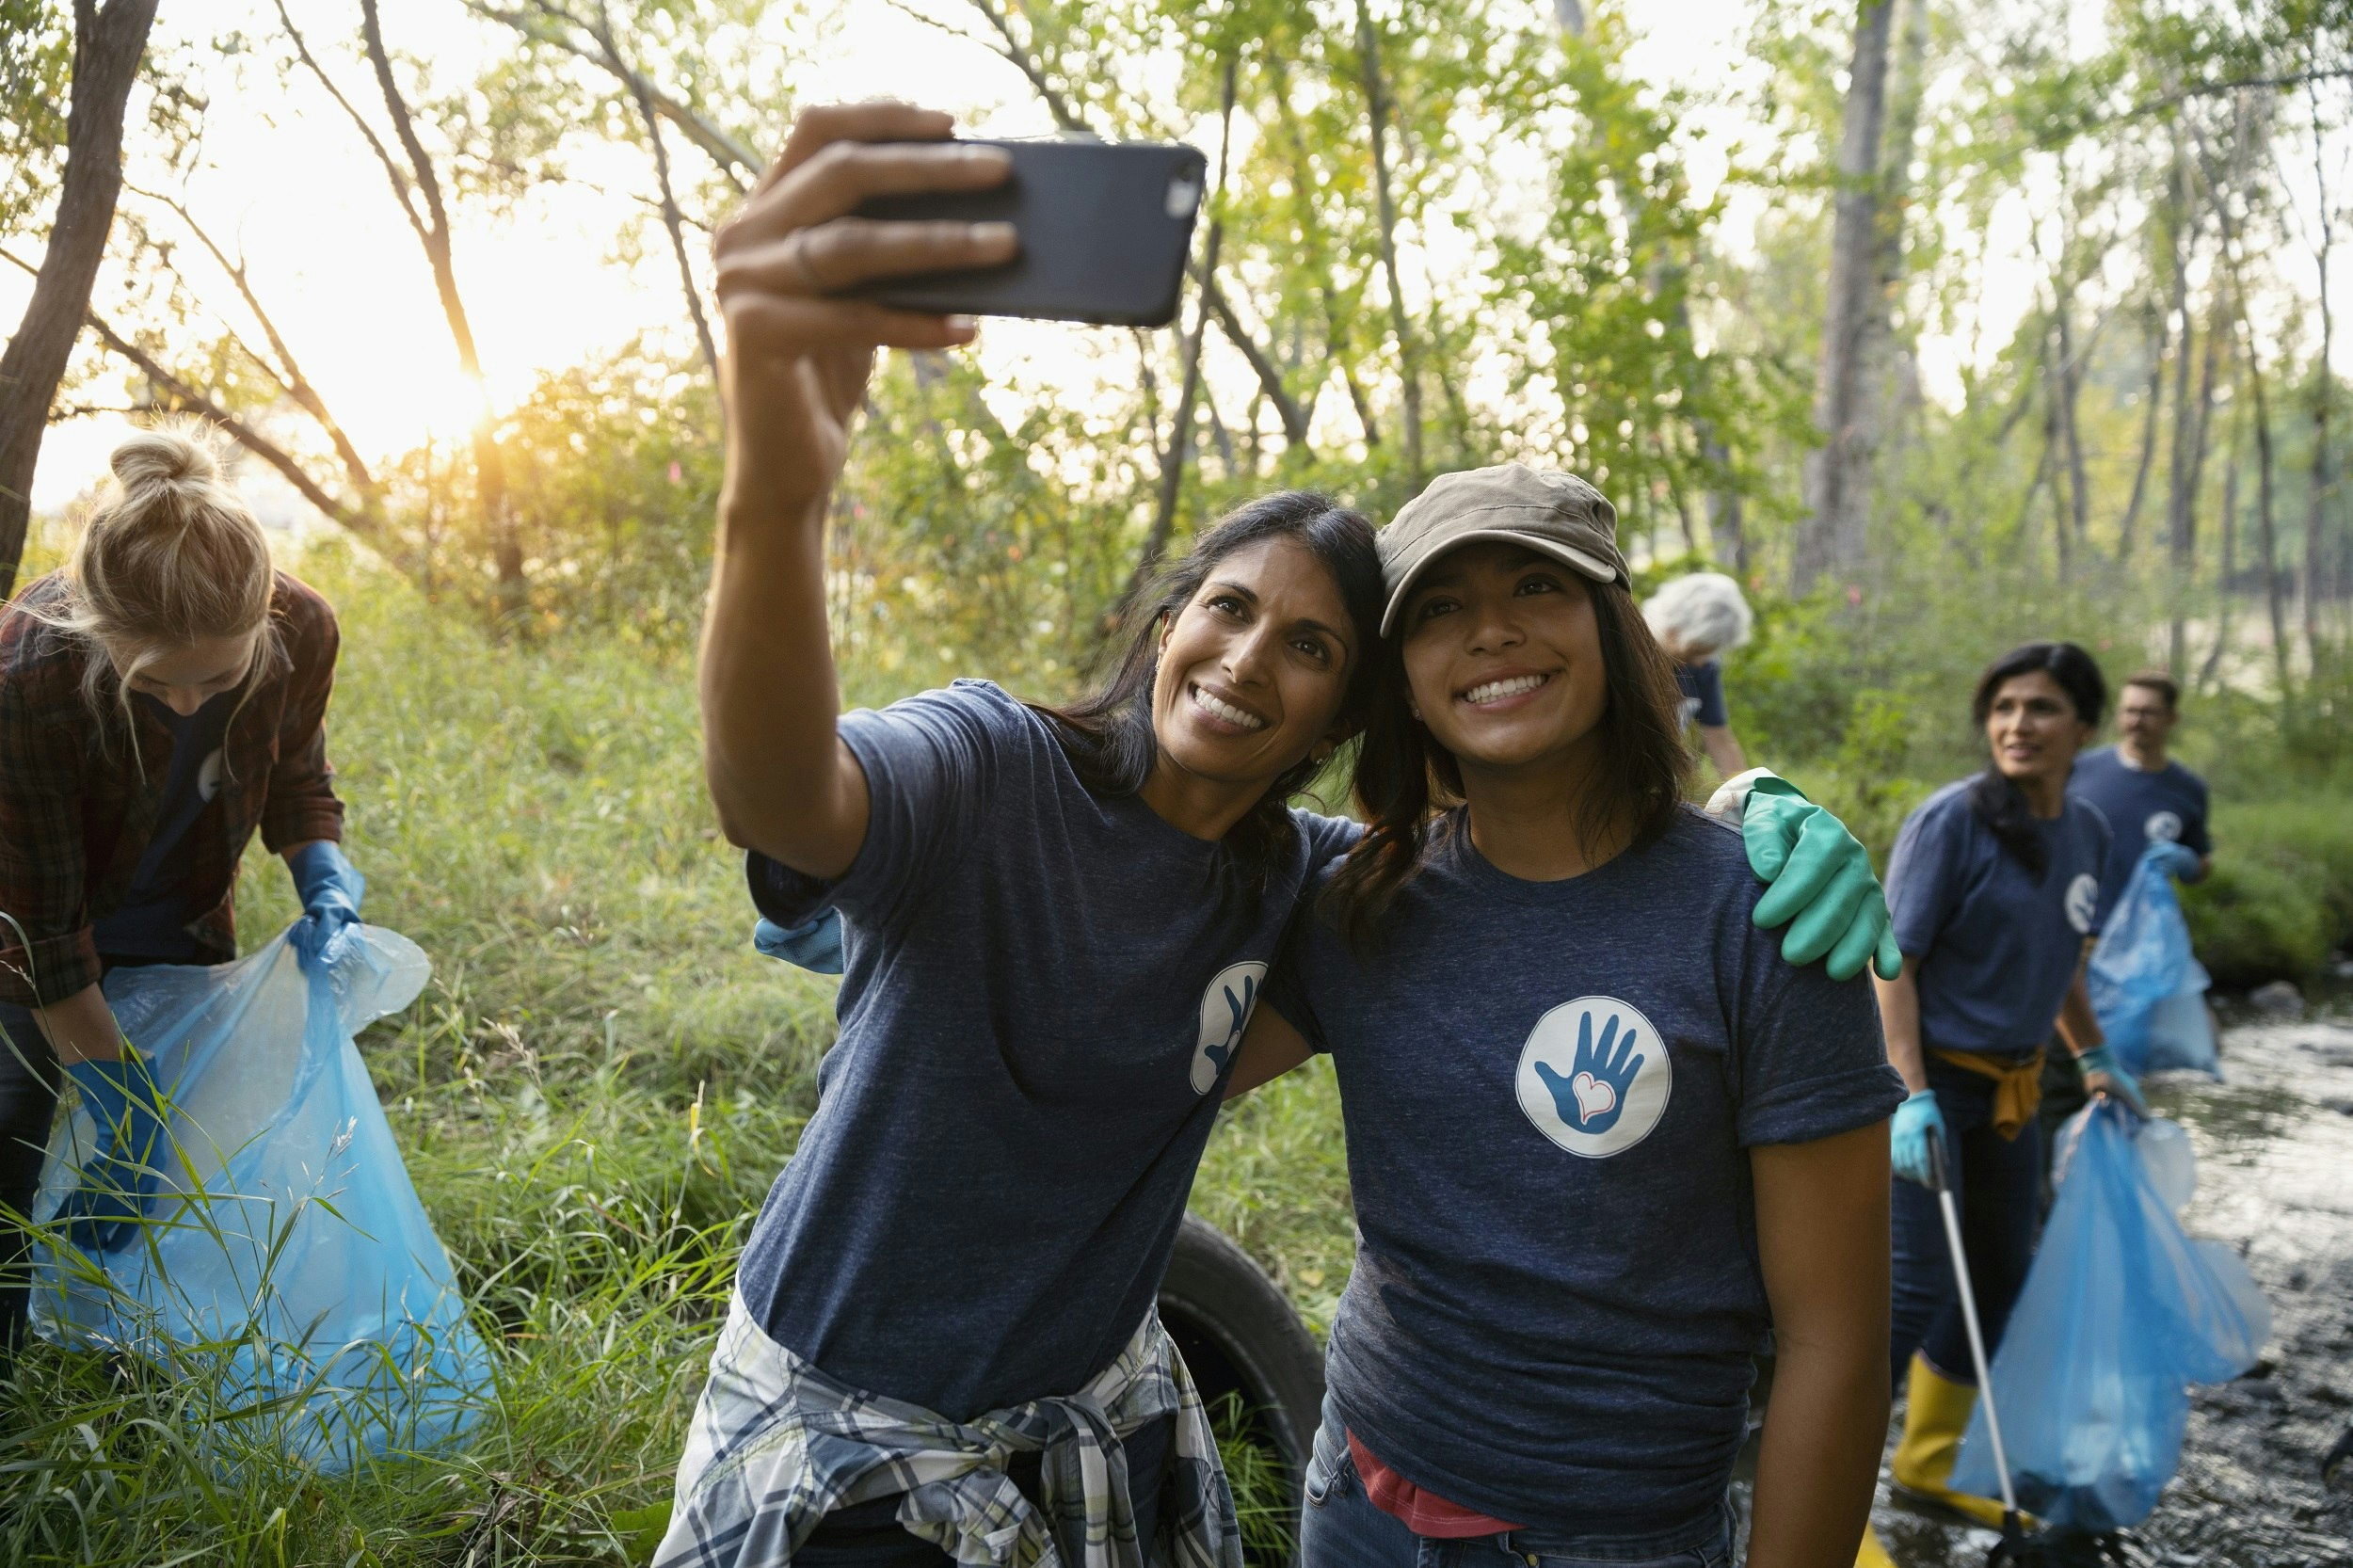 A woman and a teenage girl wearing matching t-shirts pose for a selfie while working with a group clearing litter in a woodland setting